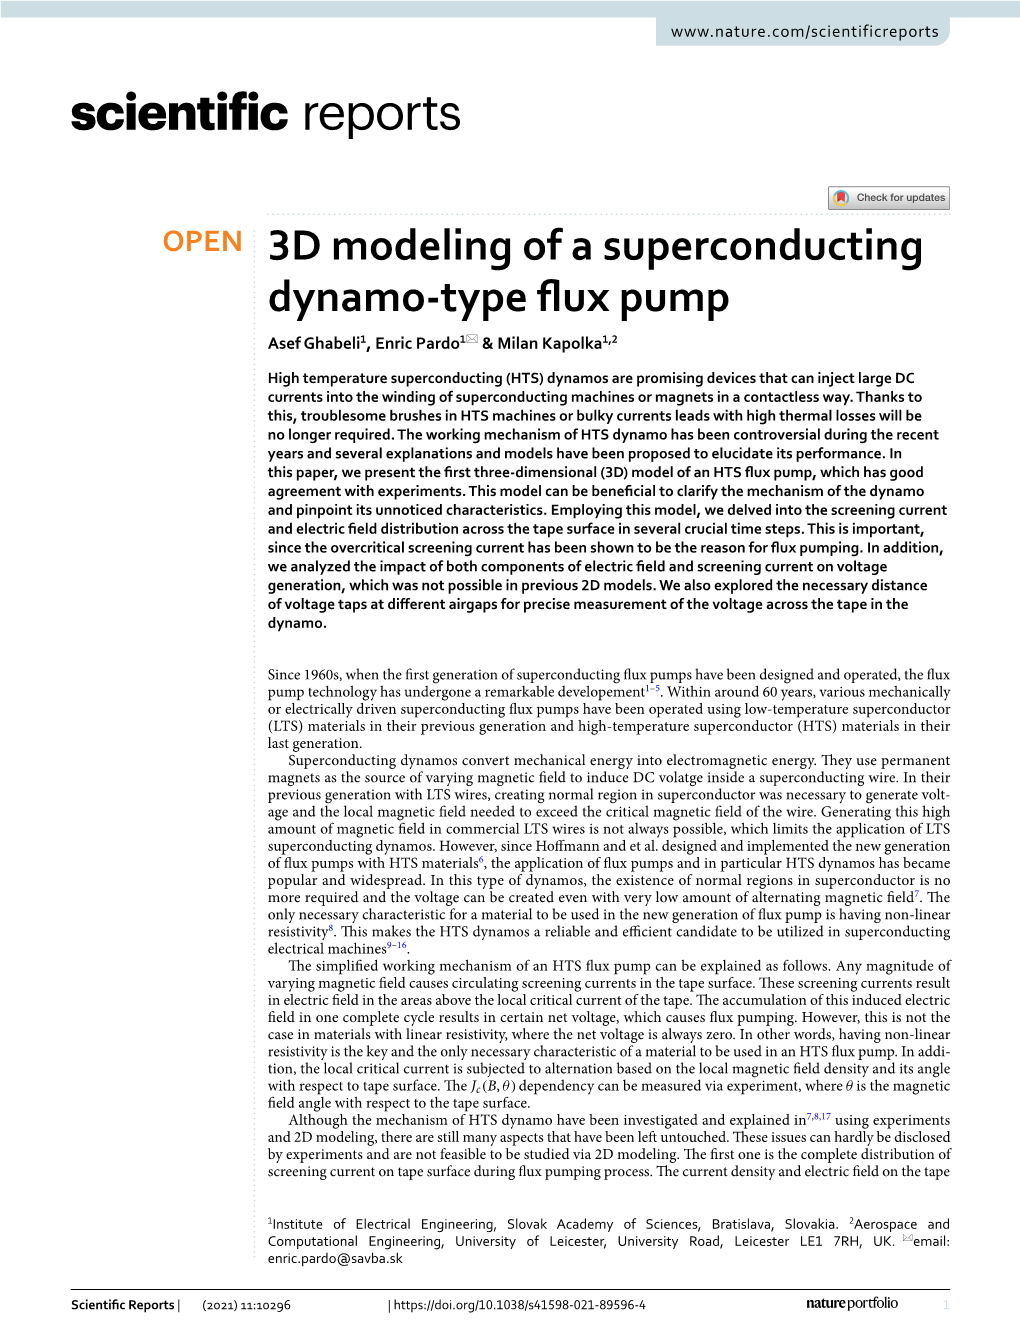 3D Modeling of a Superconducting Dynamo-Type Flux Pump